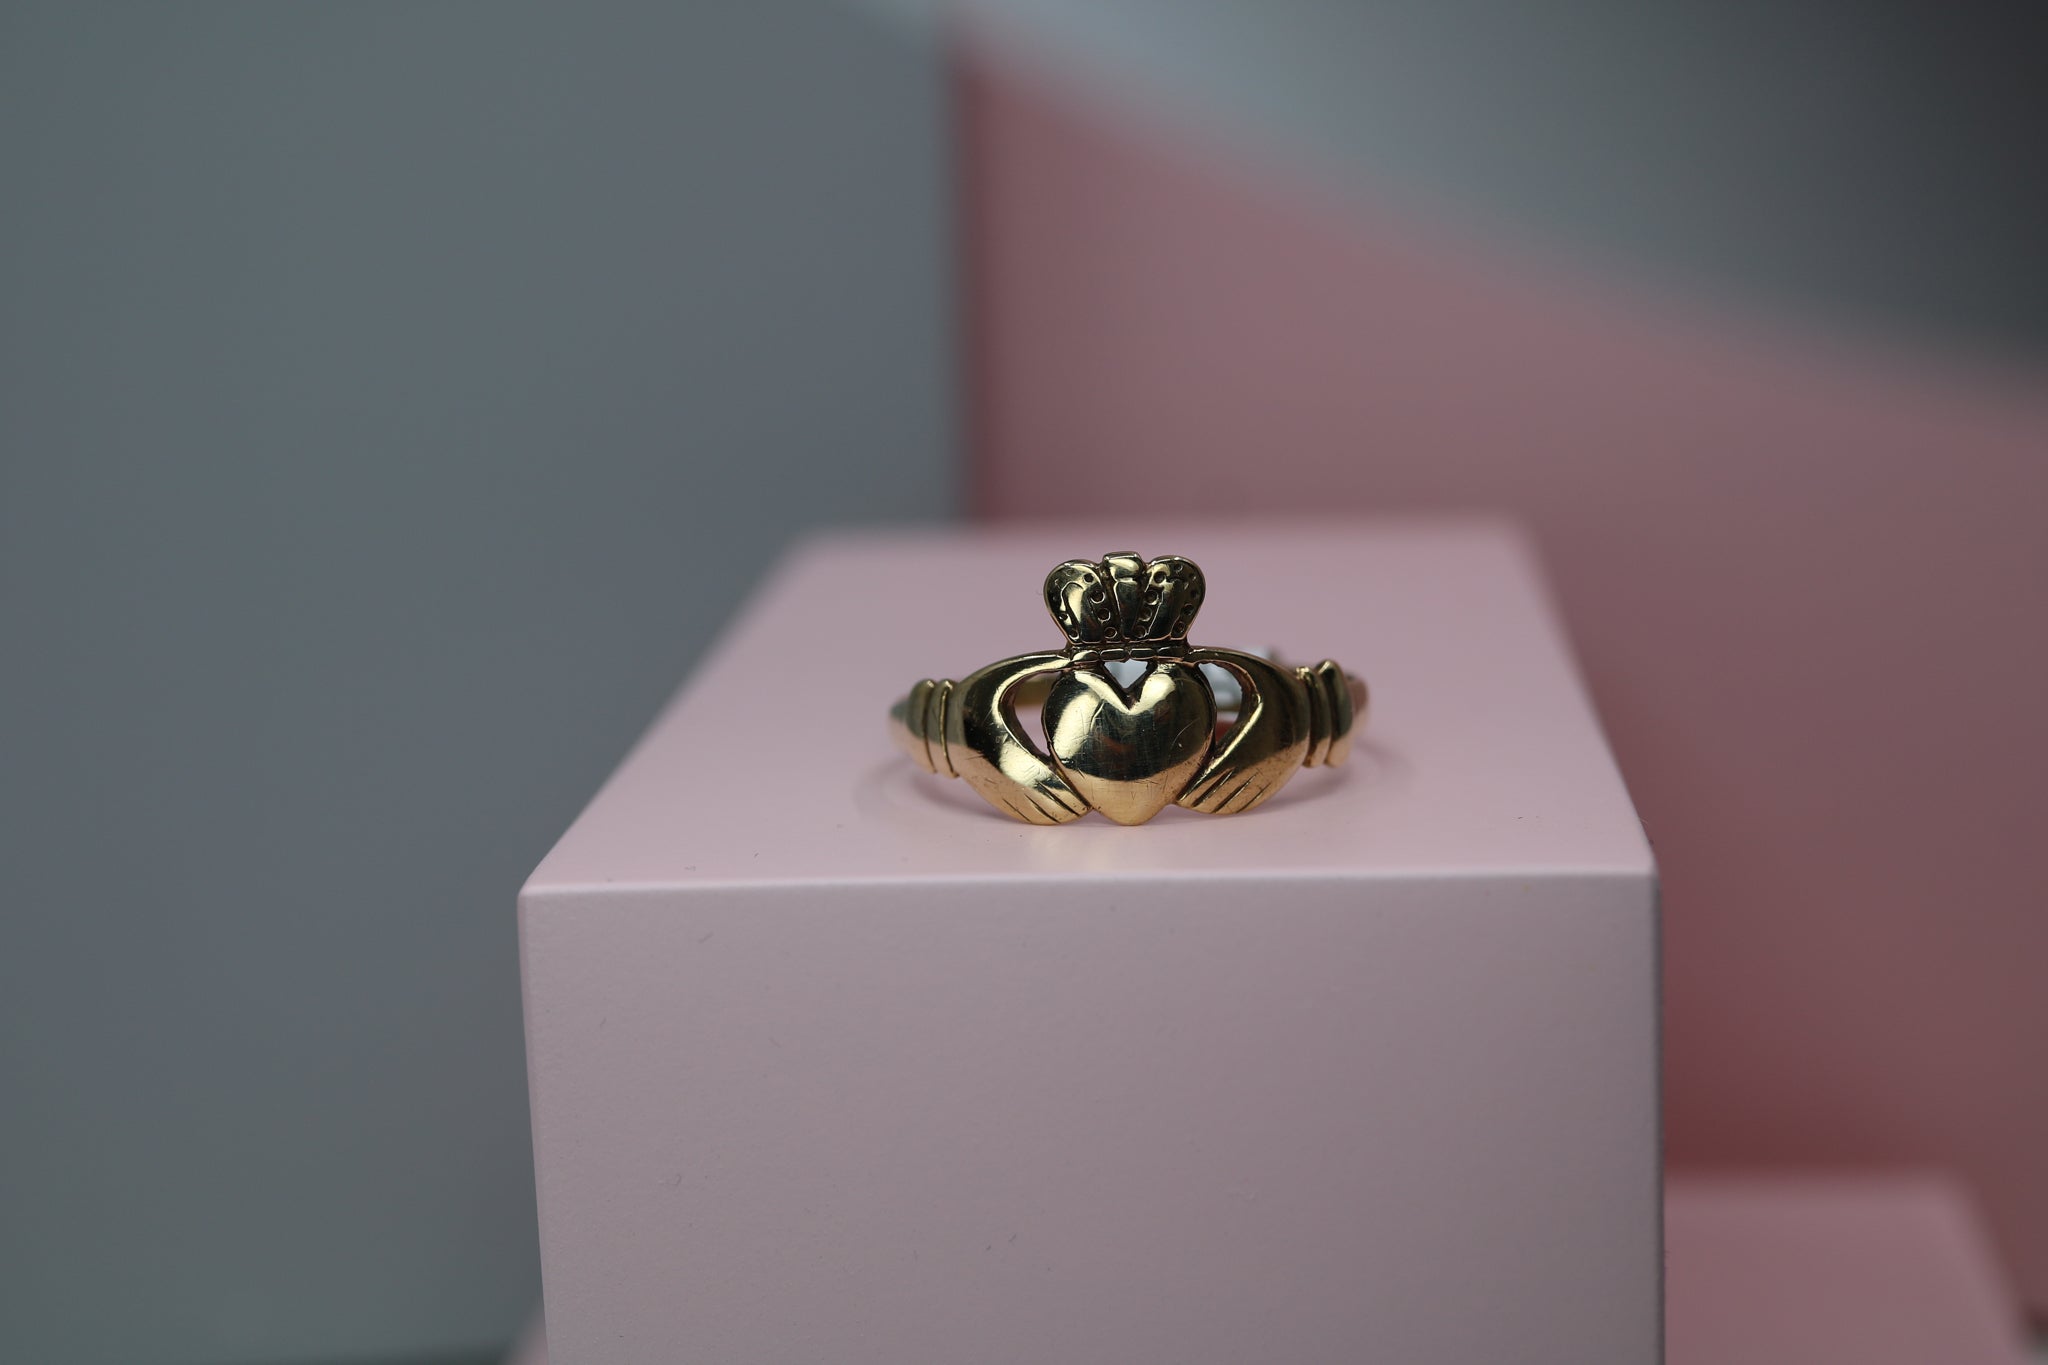 9ct Gents Claddagh Ring - HJ1010 - Hallmark Jewellers Formby & The Jewellers Bench Widnes